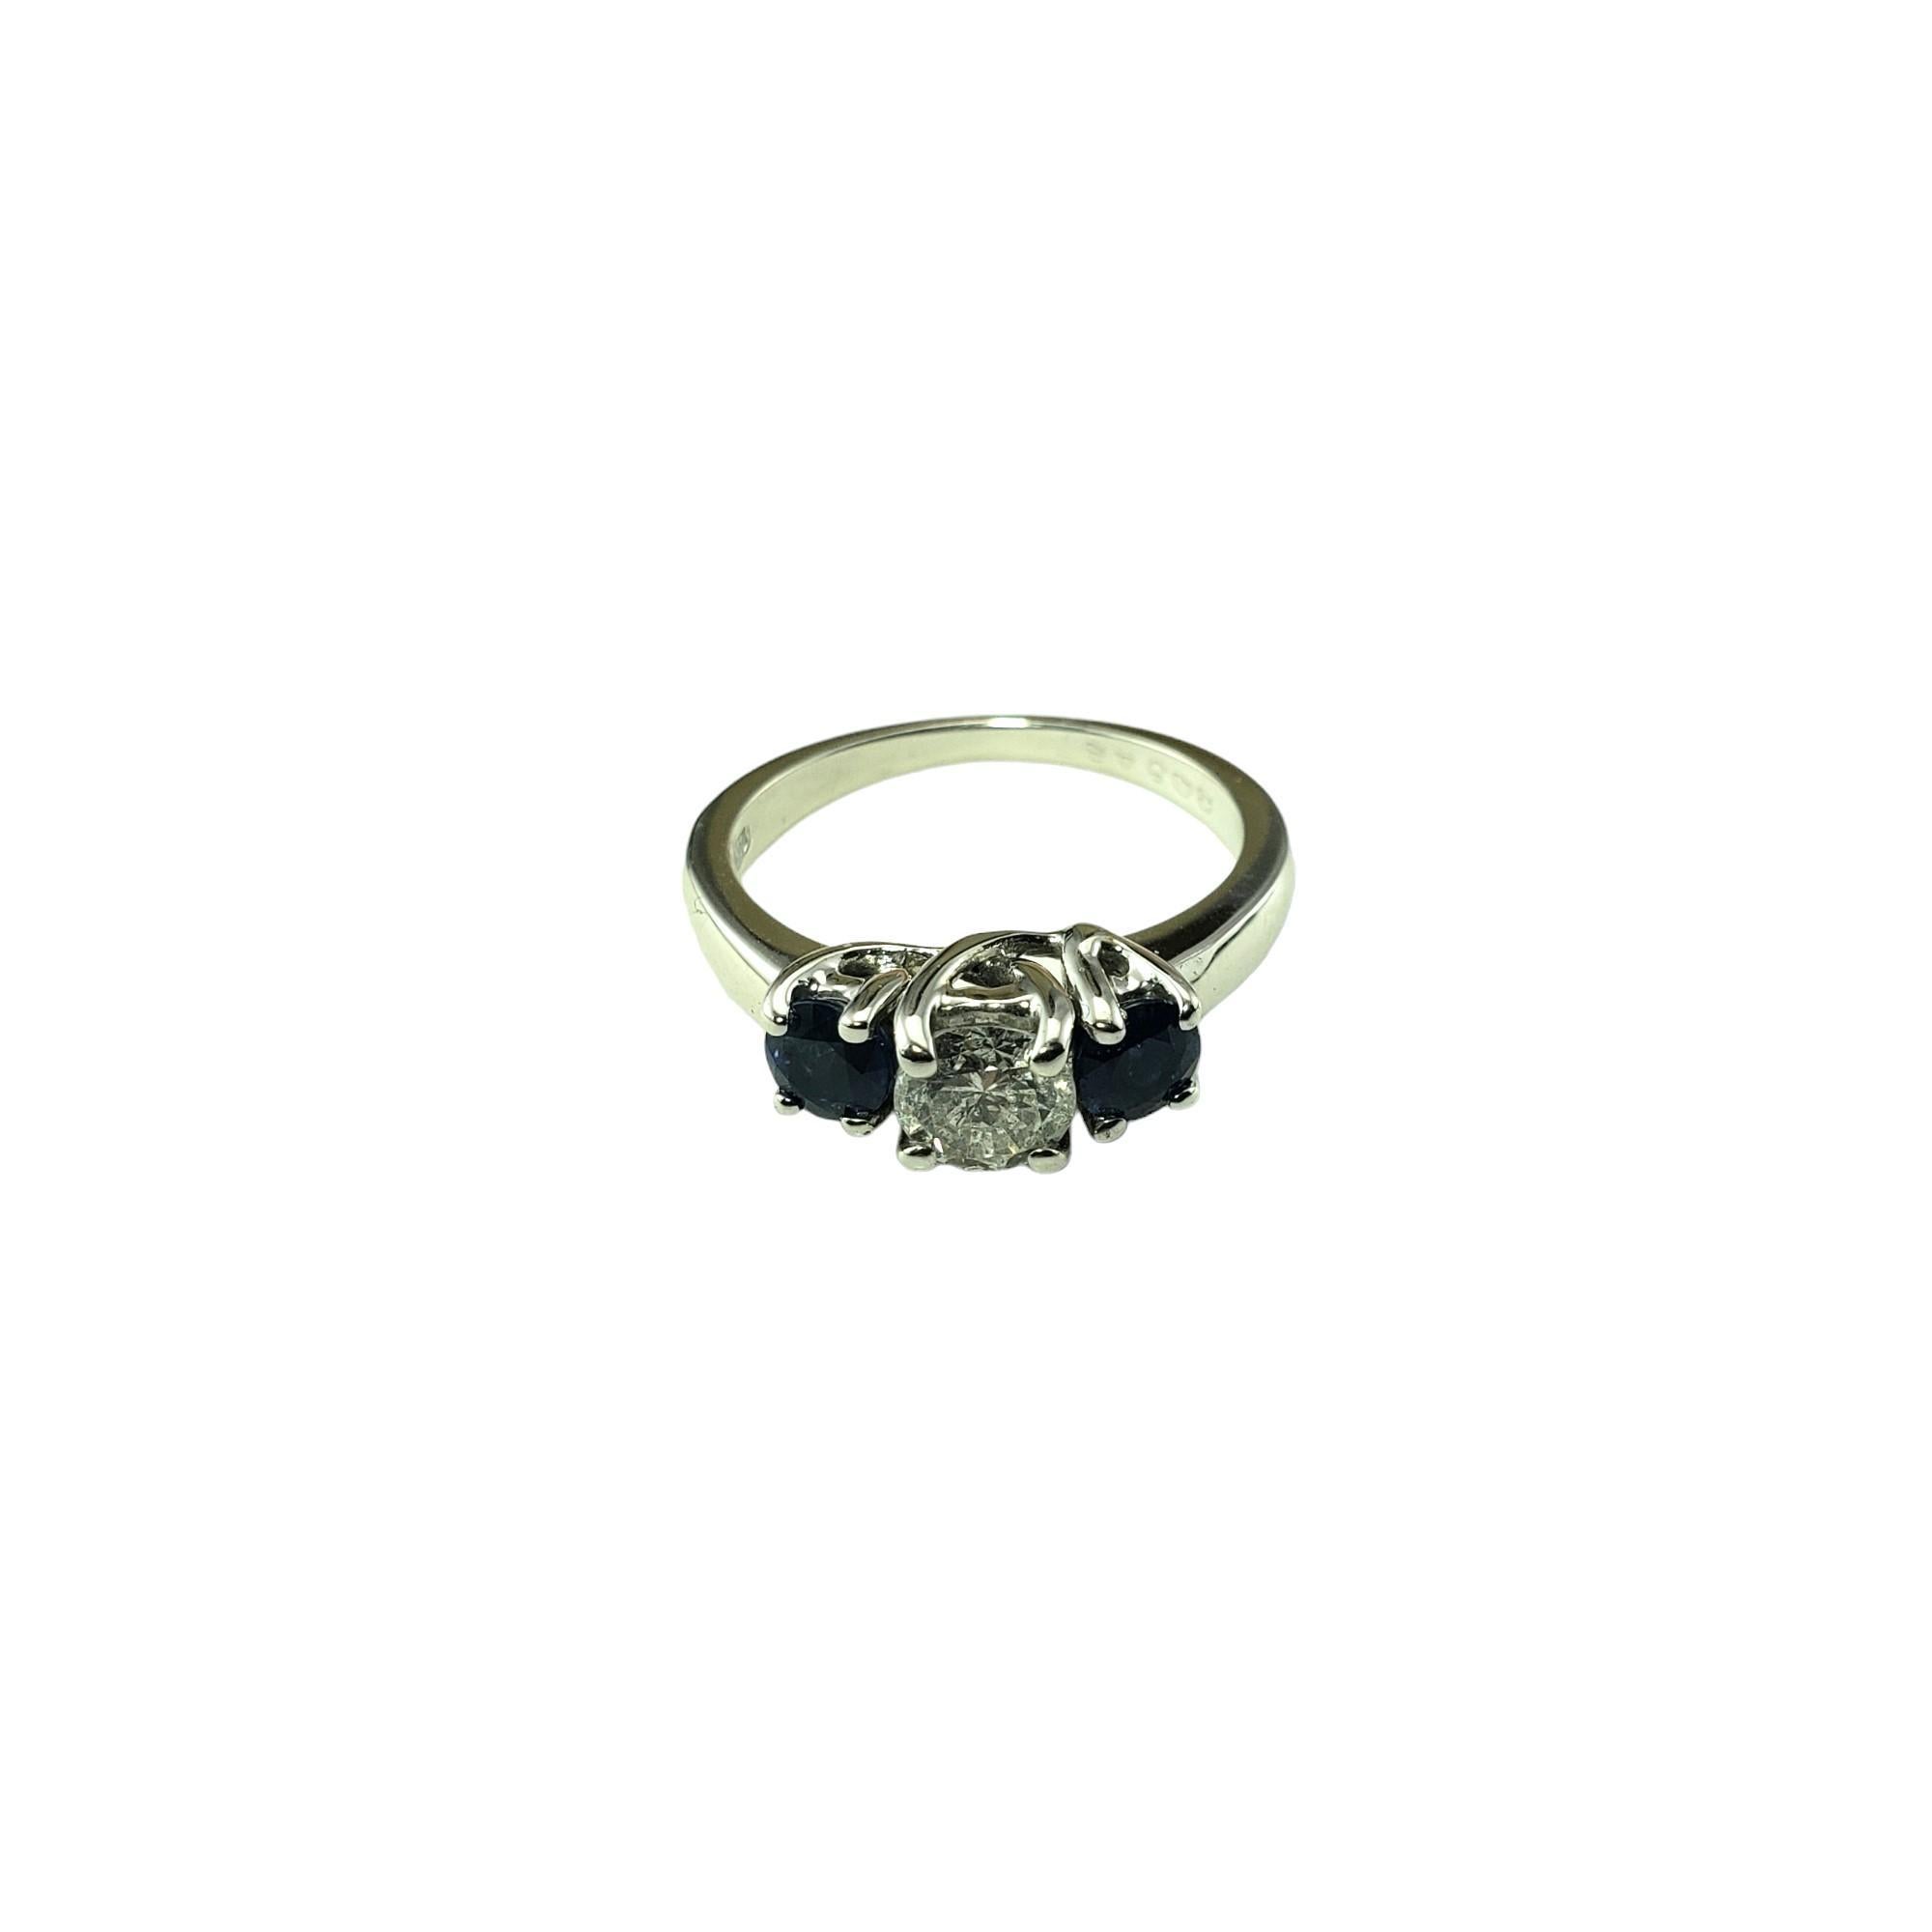 Vintage 18 Karat White Gold Sapphire and Diamond Ring Size 6 JAGi Certified #15731-

This elegant ring features one round brilliant cut diamond and two natural blue sapphires set in classic 18K white gold.  Width:  5 mm.  Shank: 1.7 mm.

Total